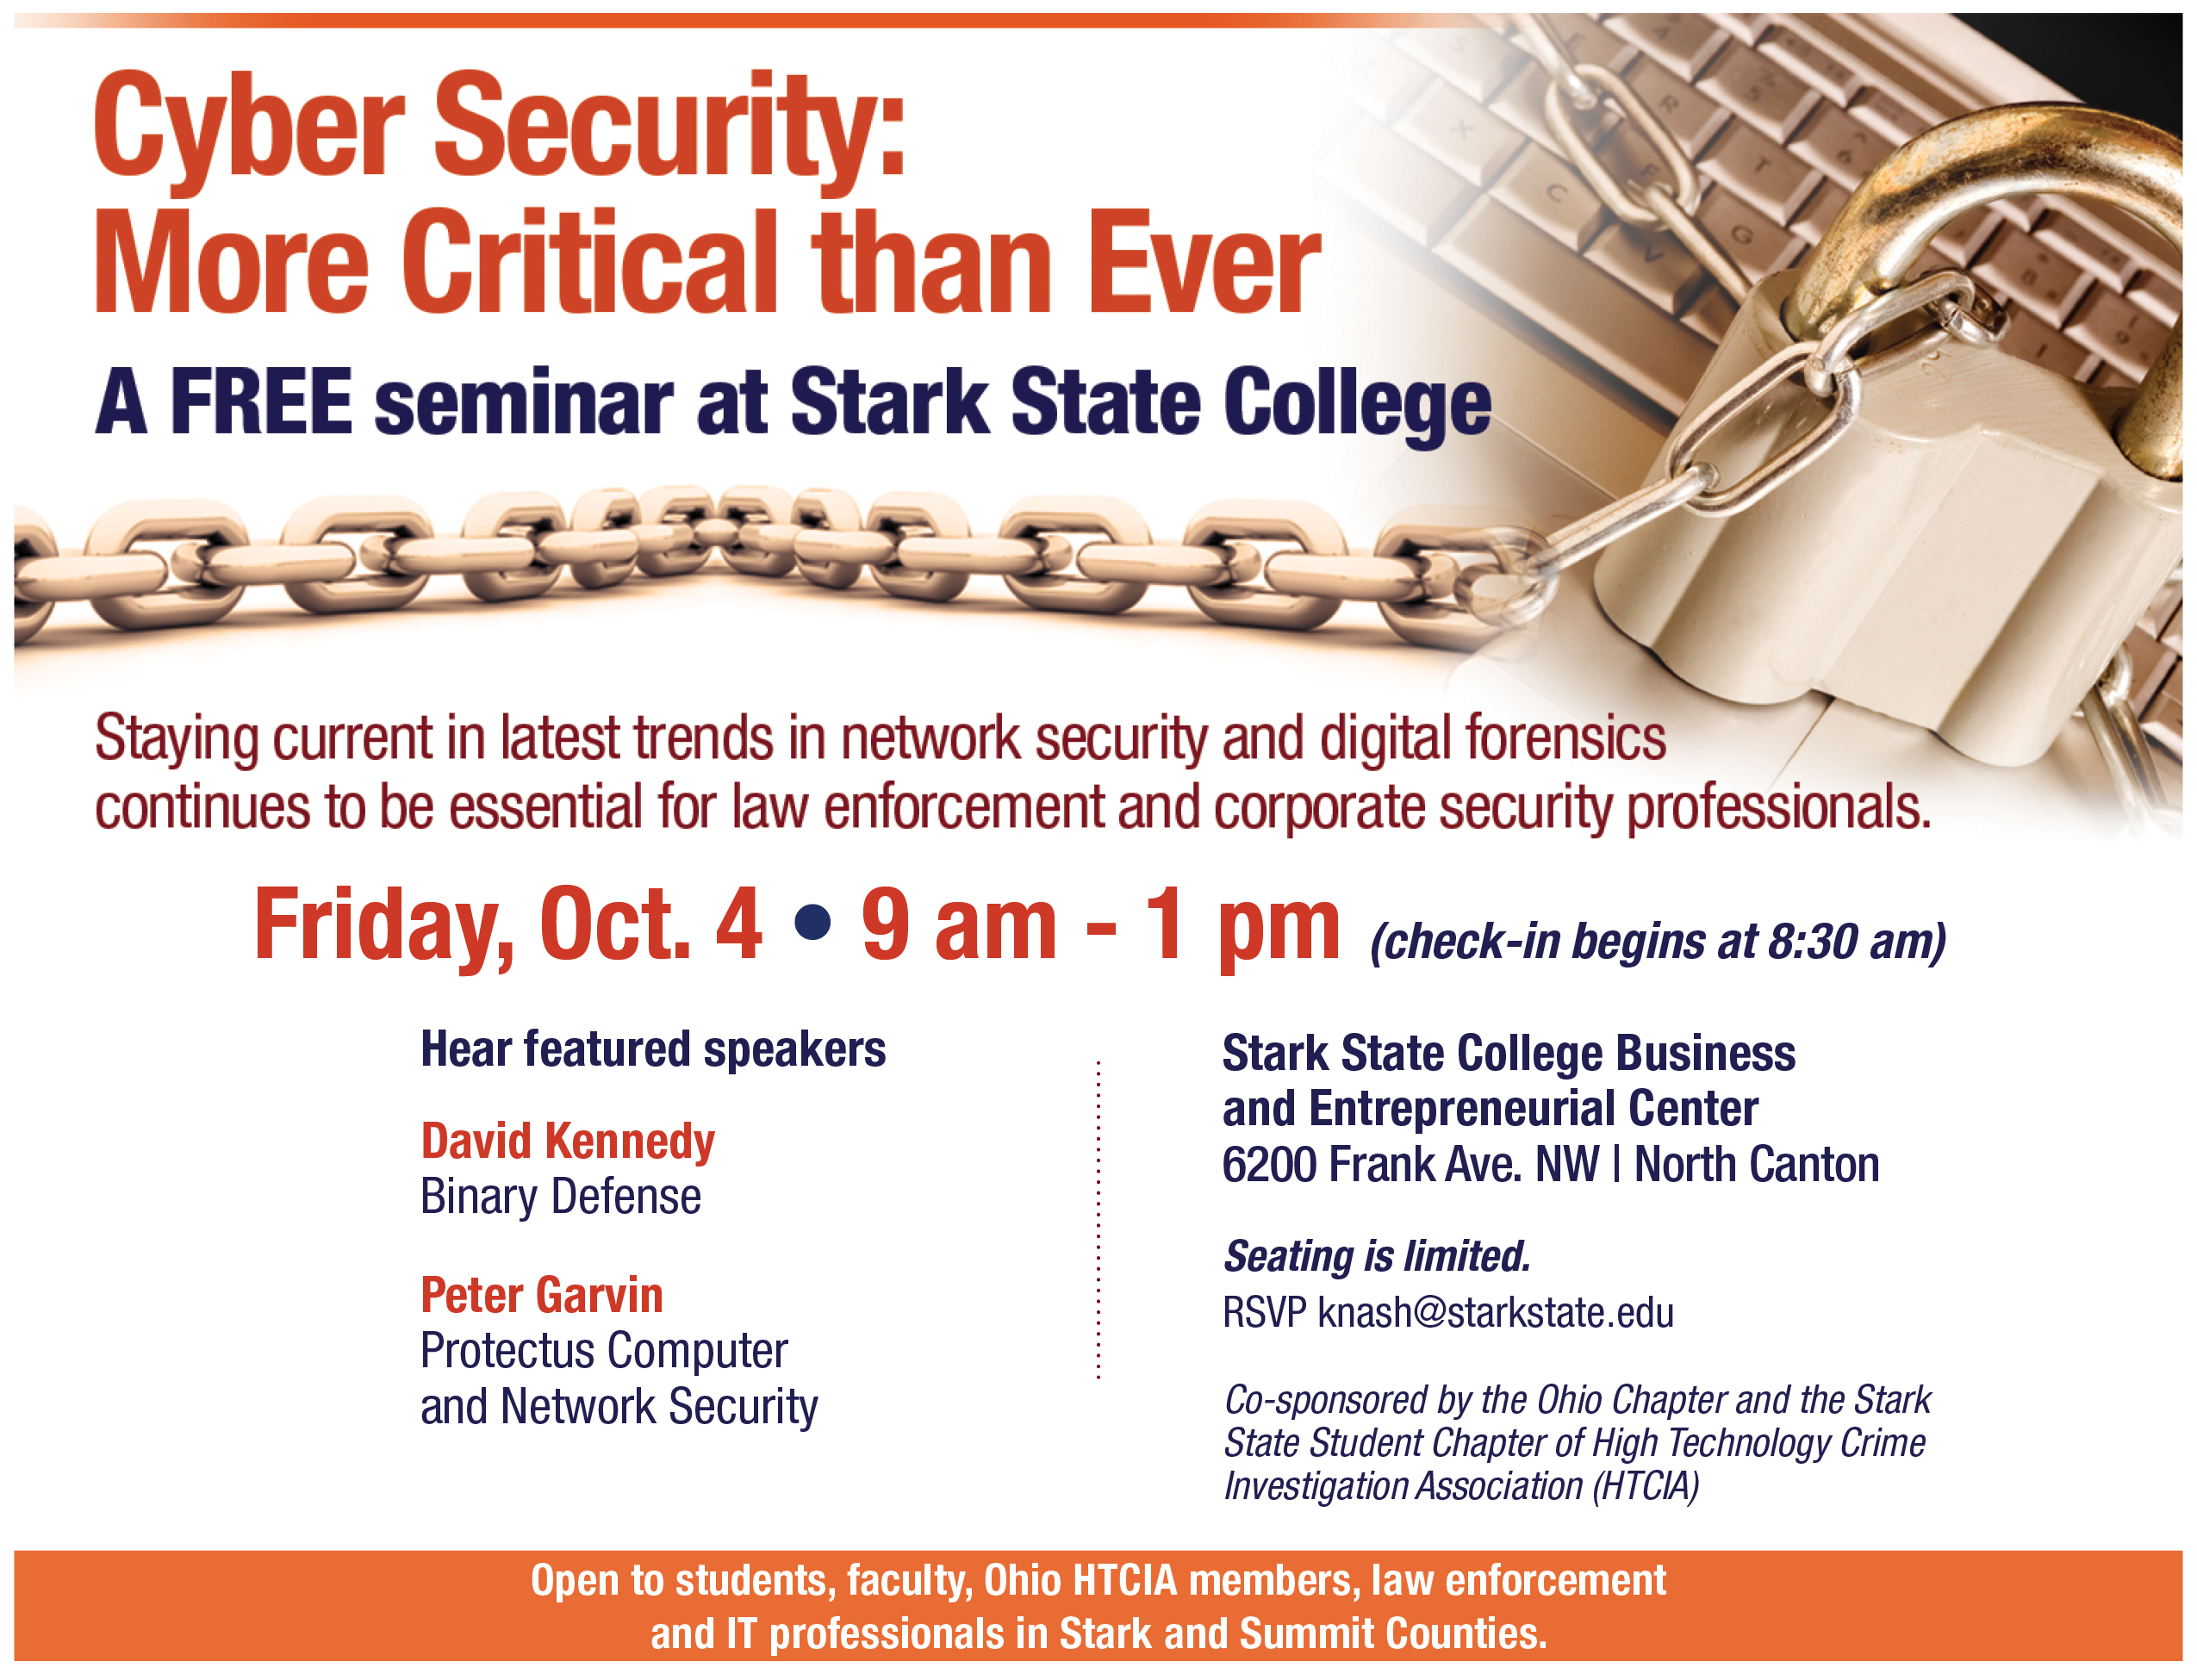 Free Cyber Security seminar @ Stark State College Business and Entrepreneurial Center